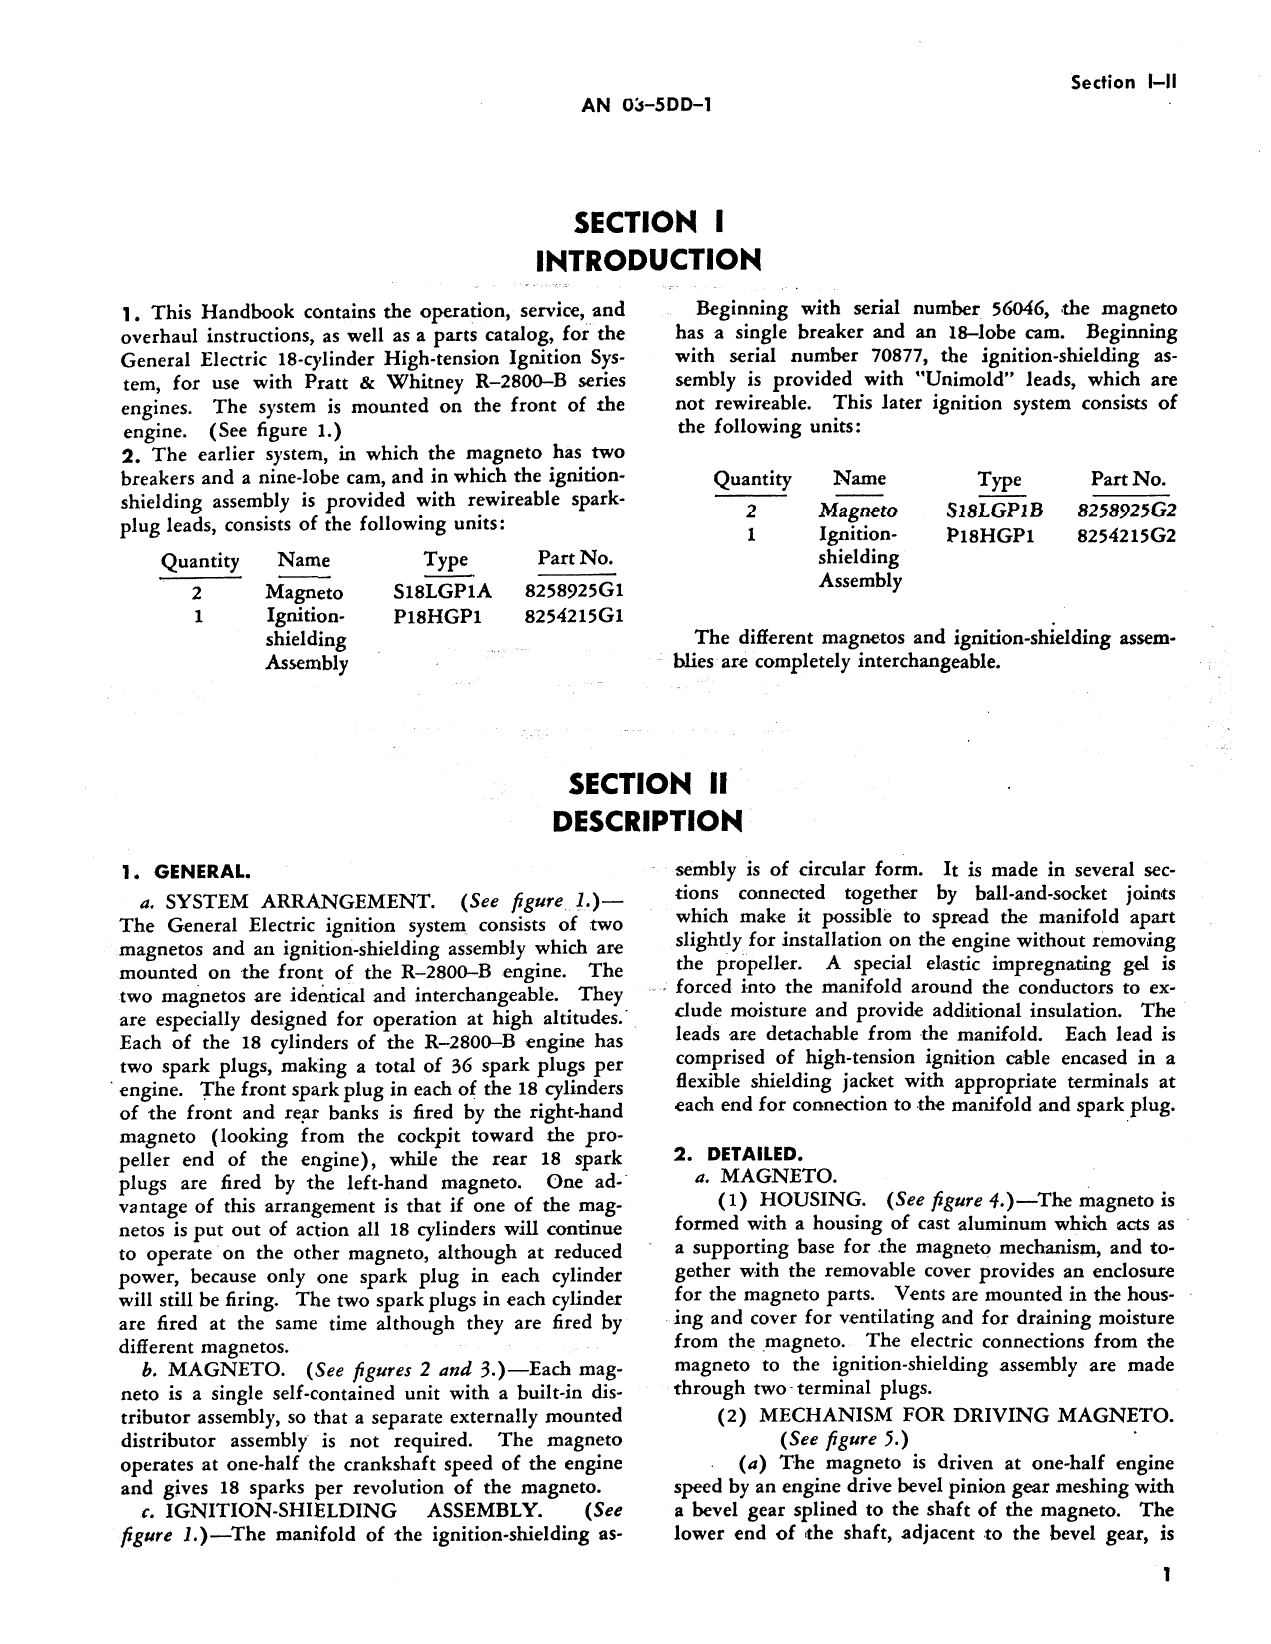 Sample page 5 from AirCorps Library document: Operation, Service, & Overhaul Manual with Parts Catalog for R-2800 B Series